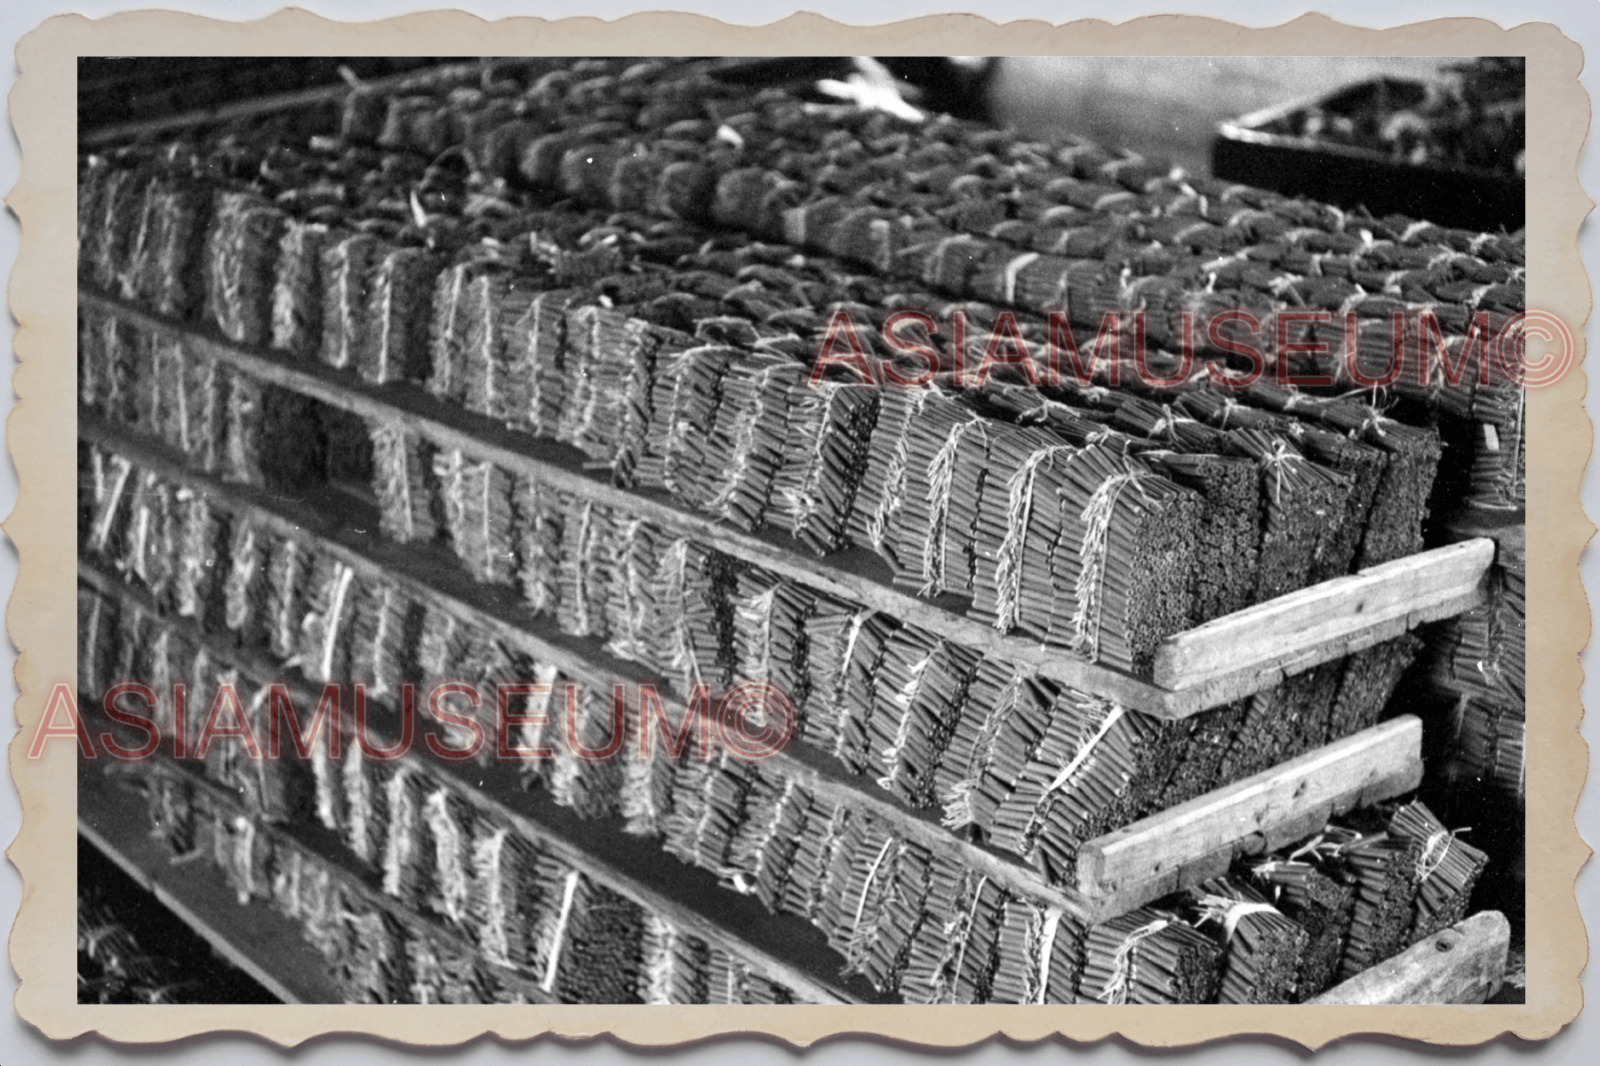 40's MACAU MACAO Firecrecker Factory Stock Pile Old Vintage Photo 澳门旧照片 27131